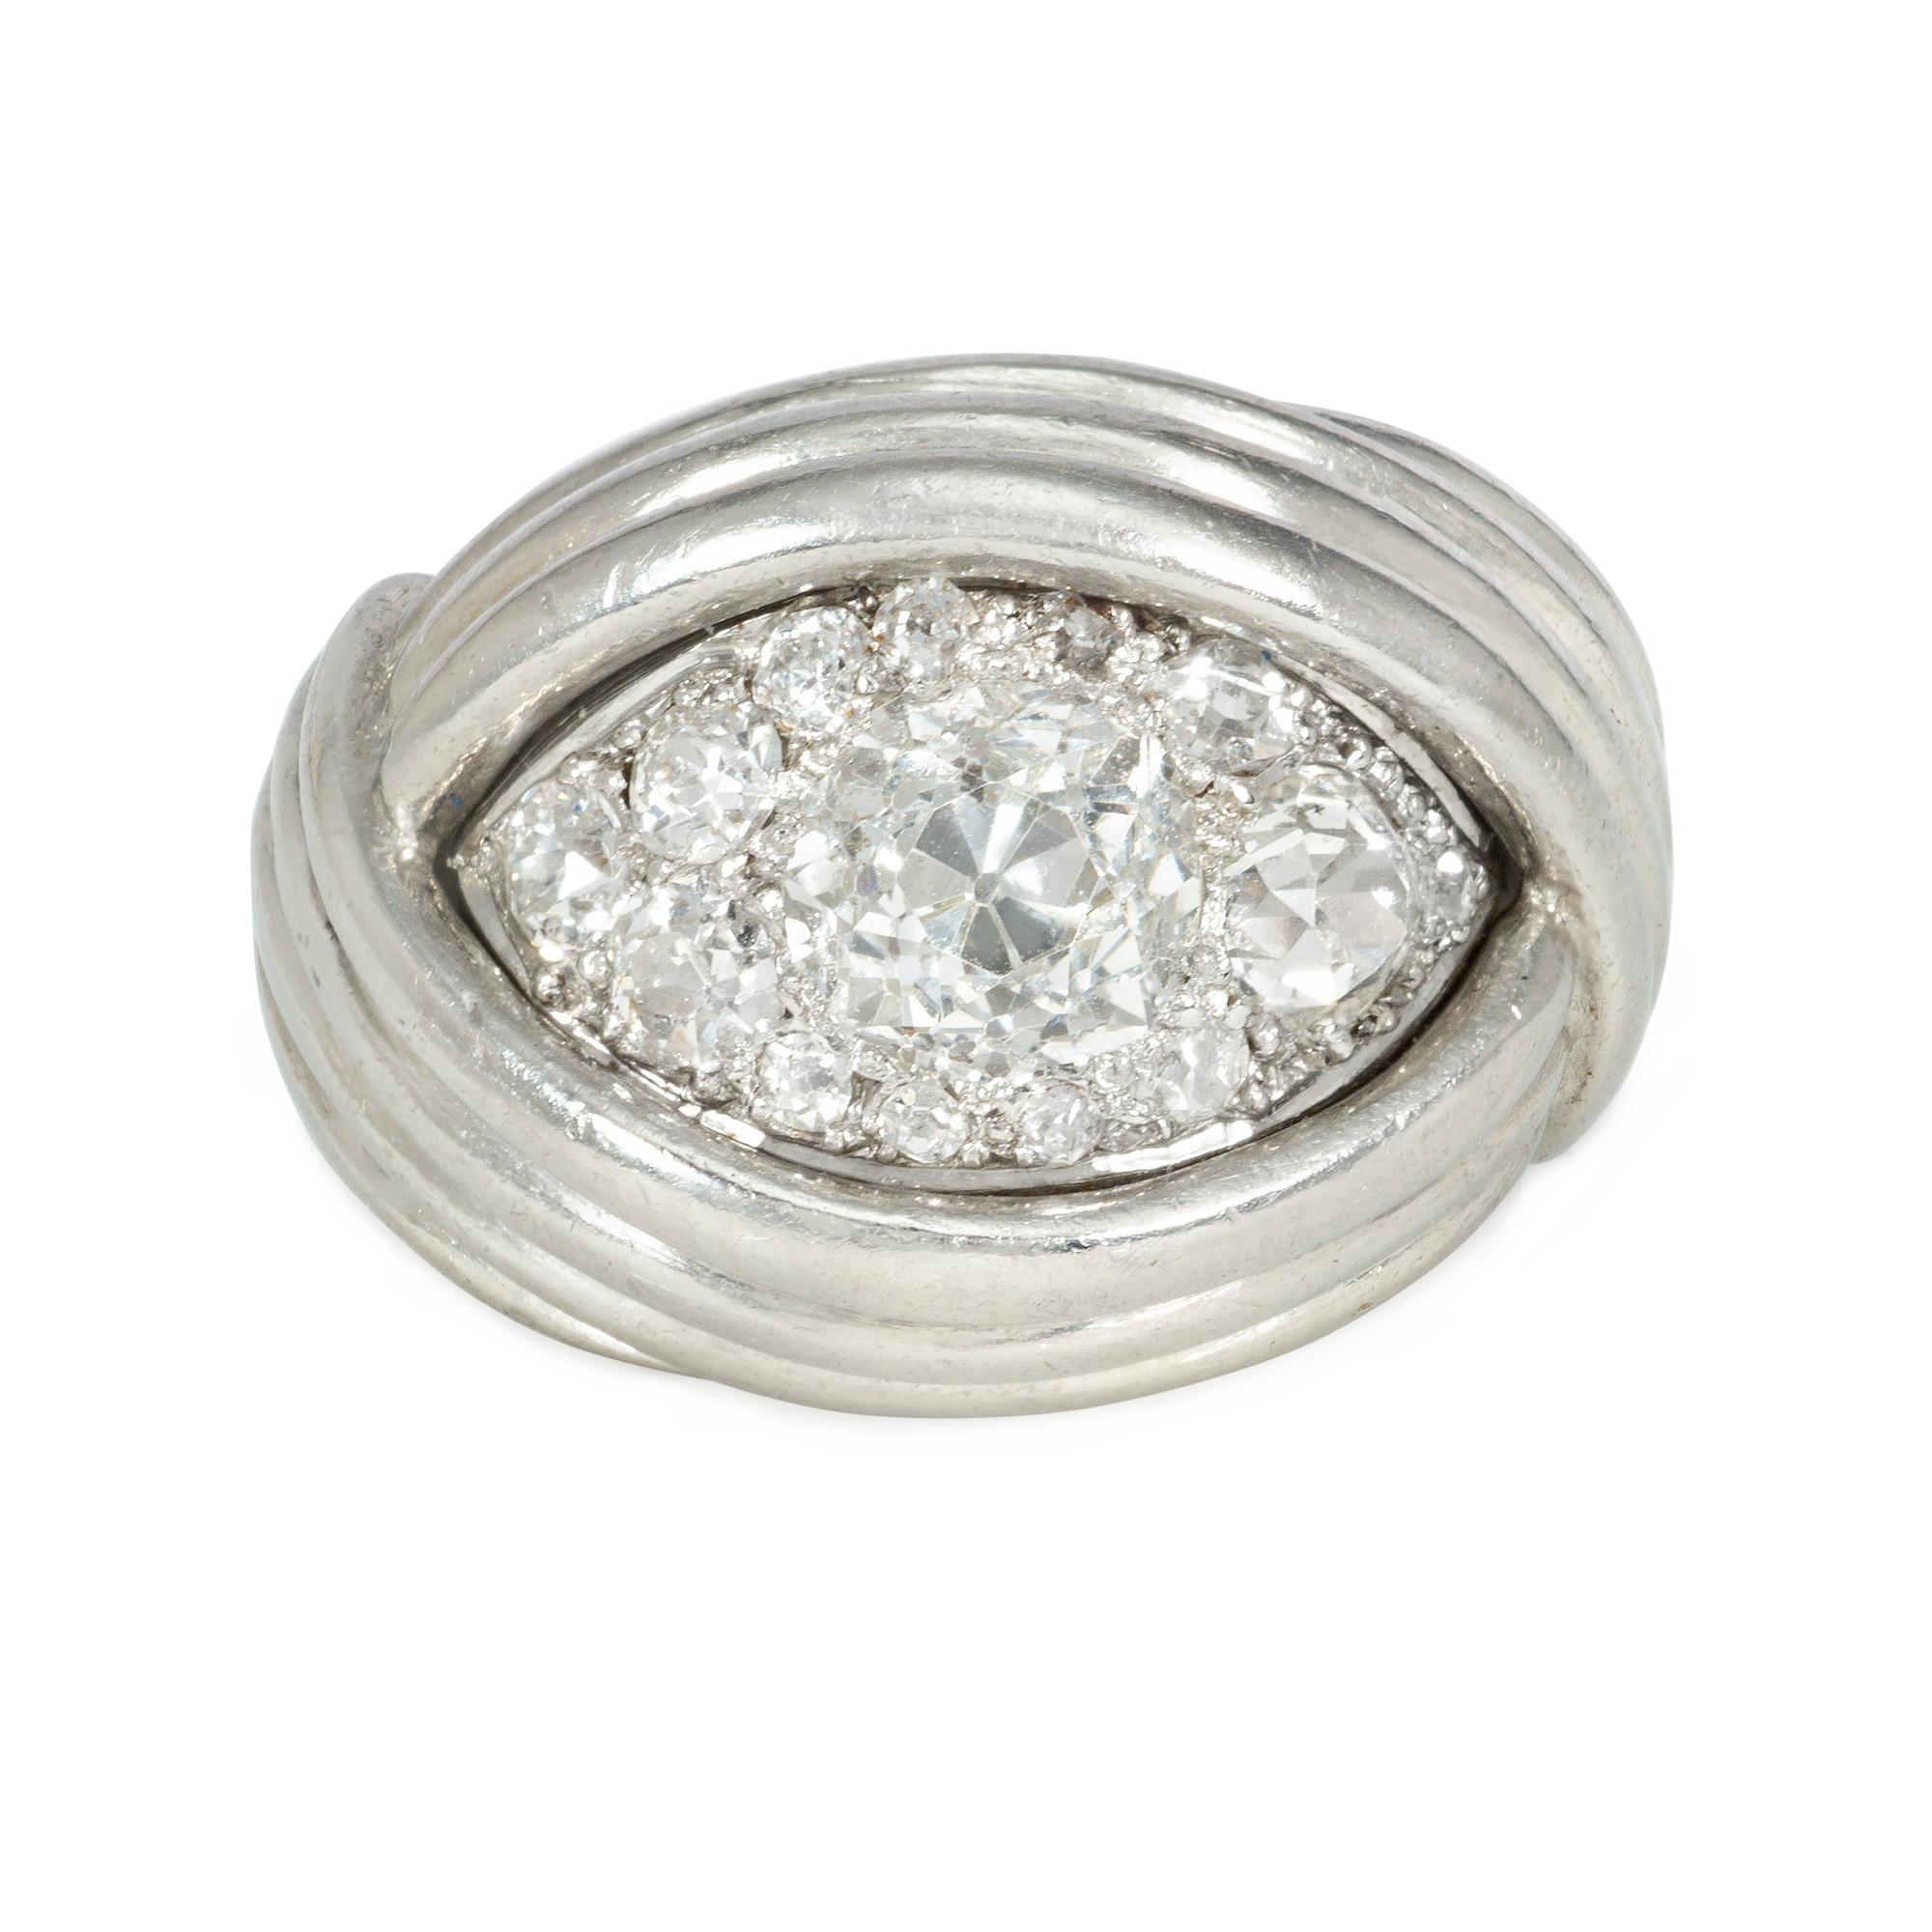 An Art Moderne diamond turban ring of wrapped bypass design with ribbed detail, in platinum.  France.  Atw 1.66 cts. (center stone is approximately 1.06 cts.)
Face up dimensions: 0.6